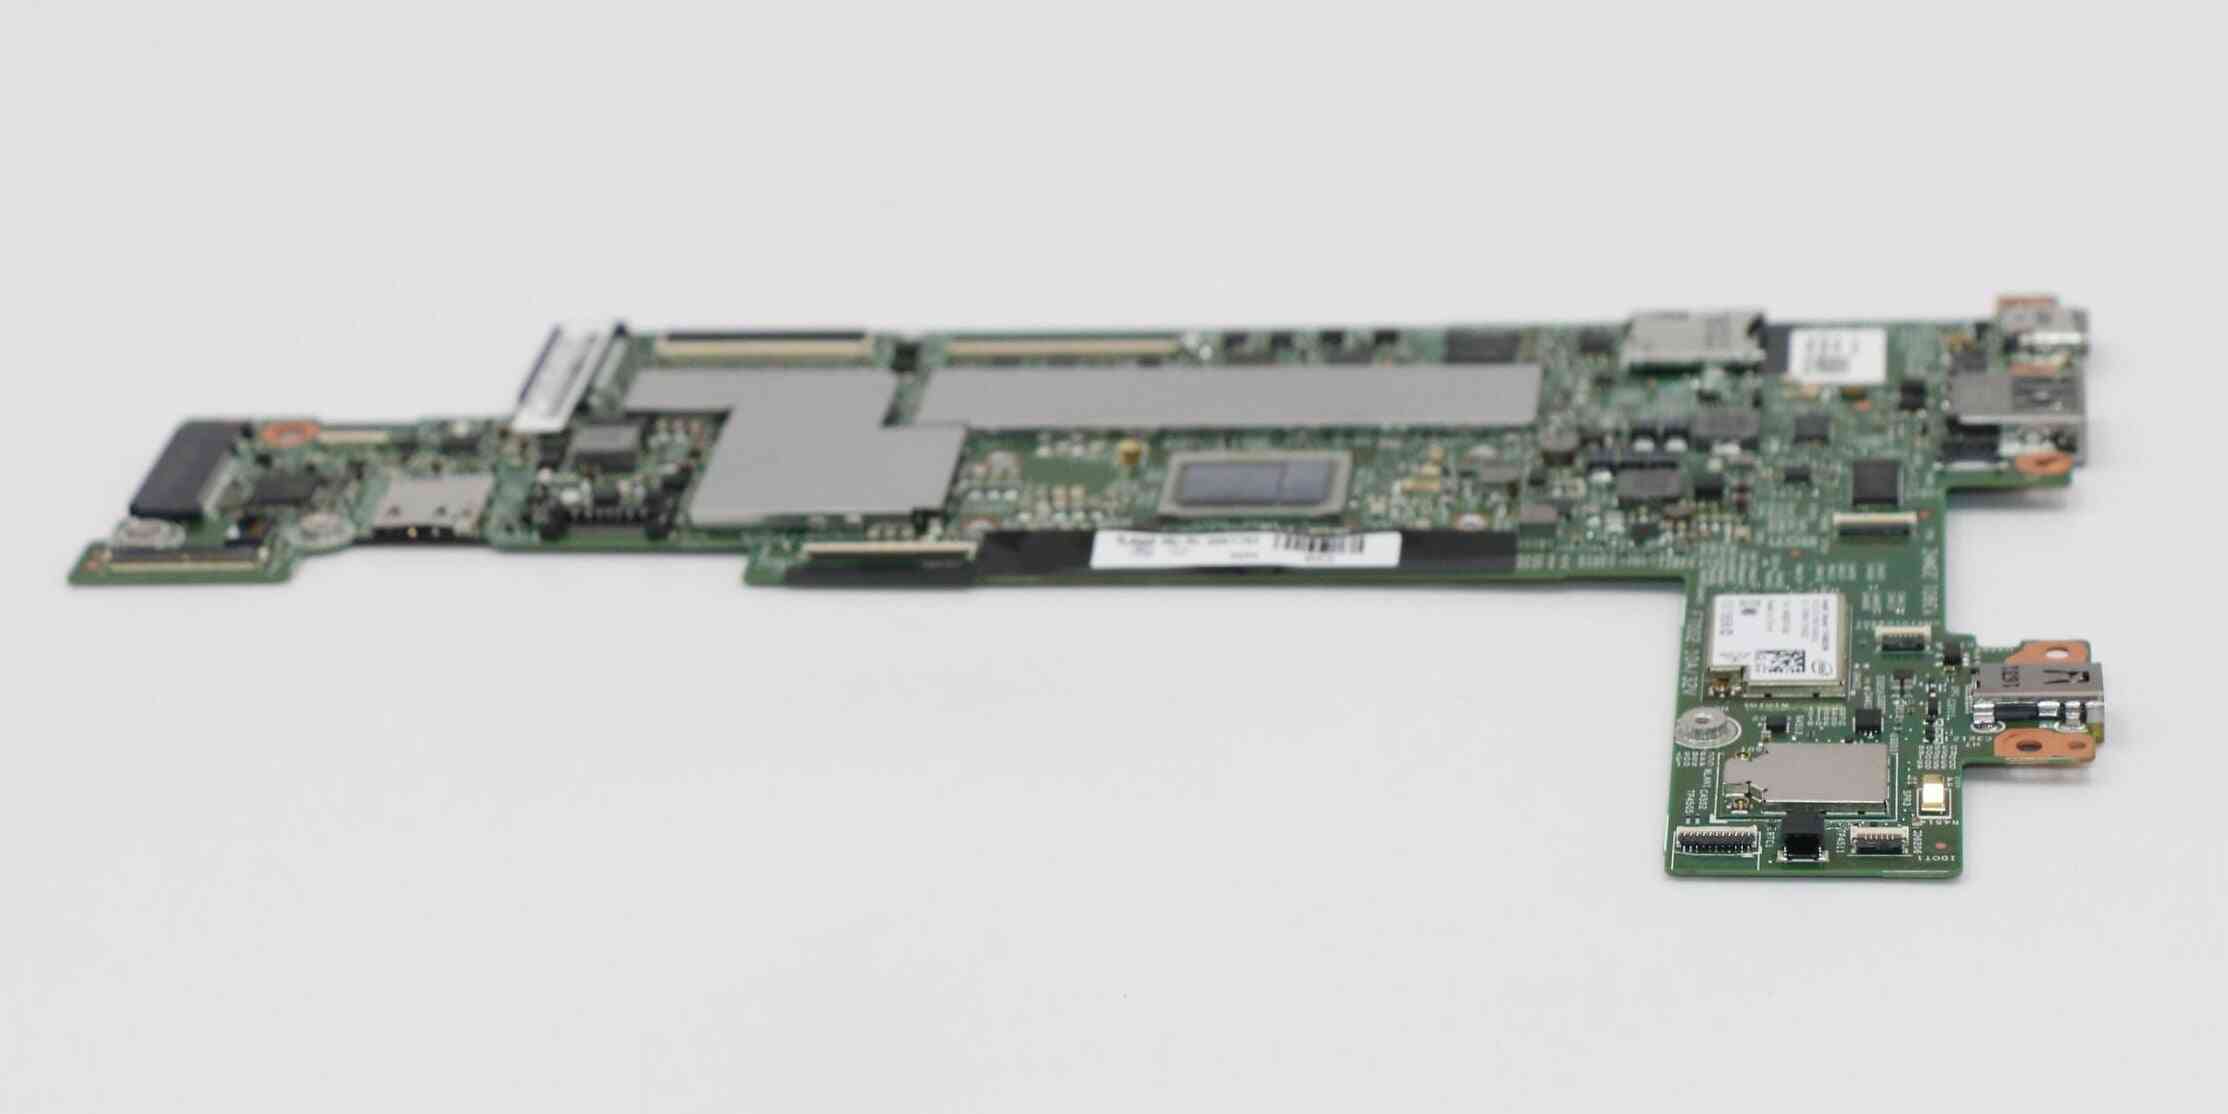 X1 Tablet 15218-2, Laptop Integrated Motherboard, Fru 00ny763 With Cpu And Ram M7-6y75, 16gb